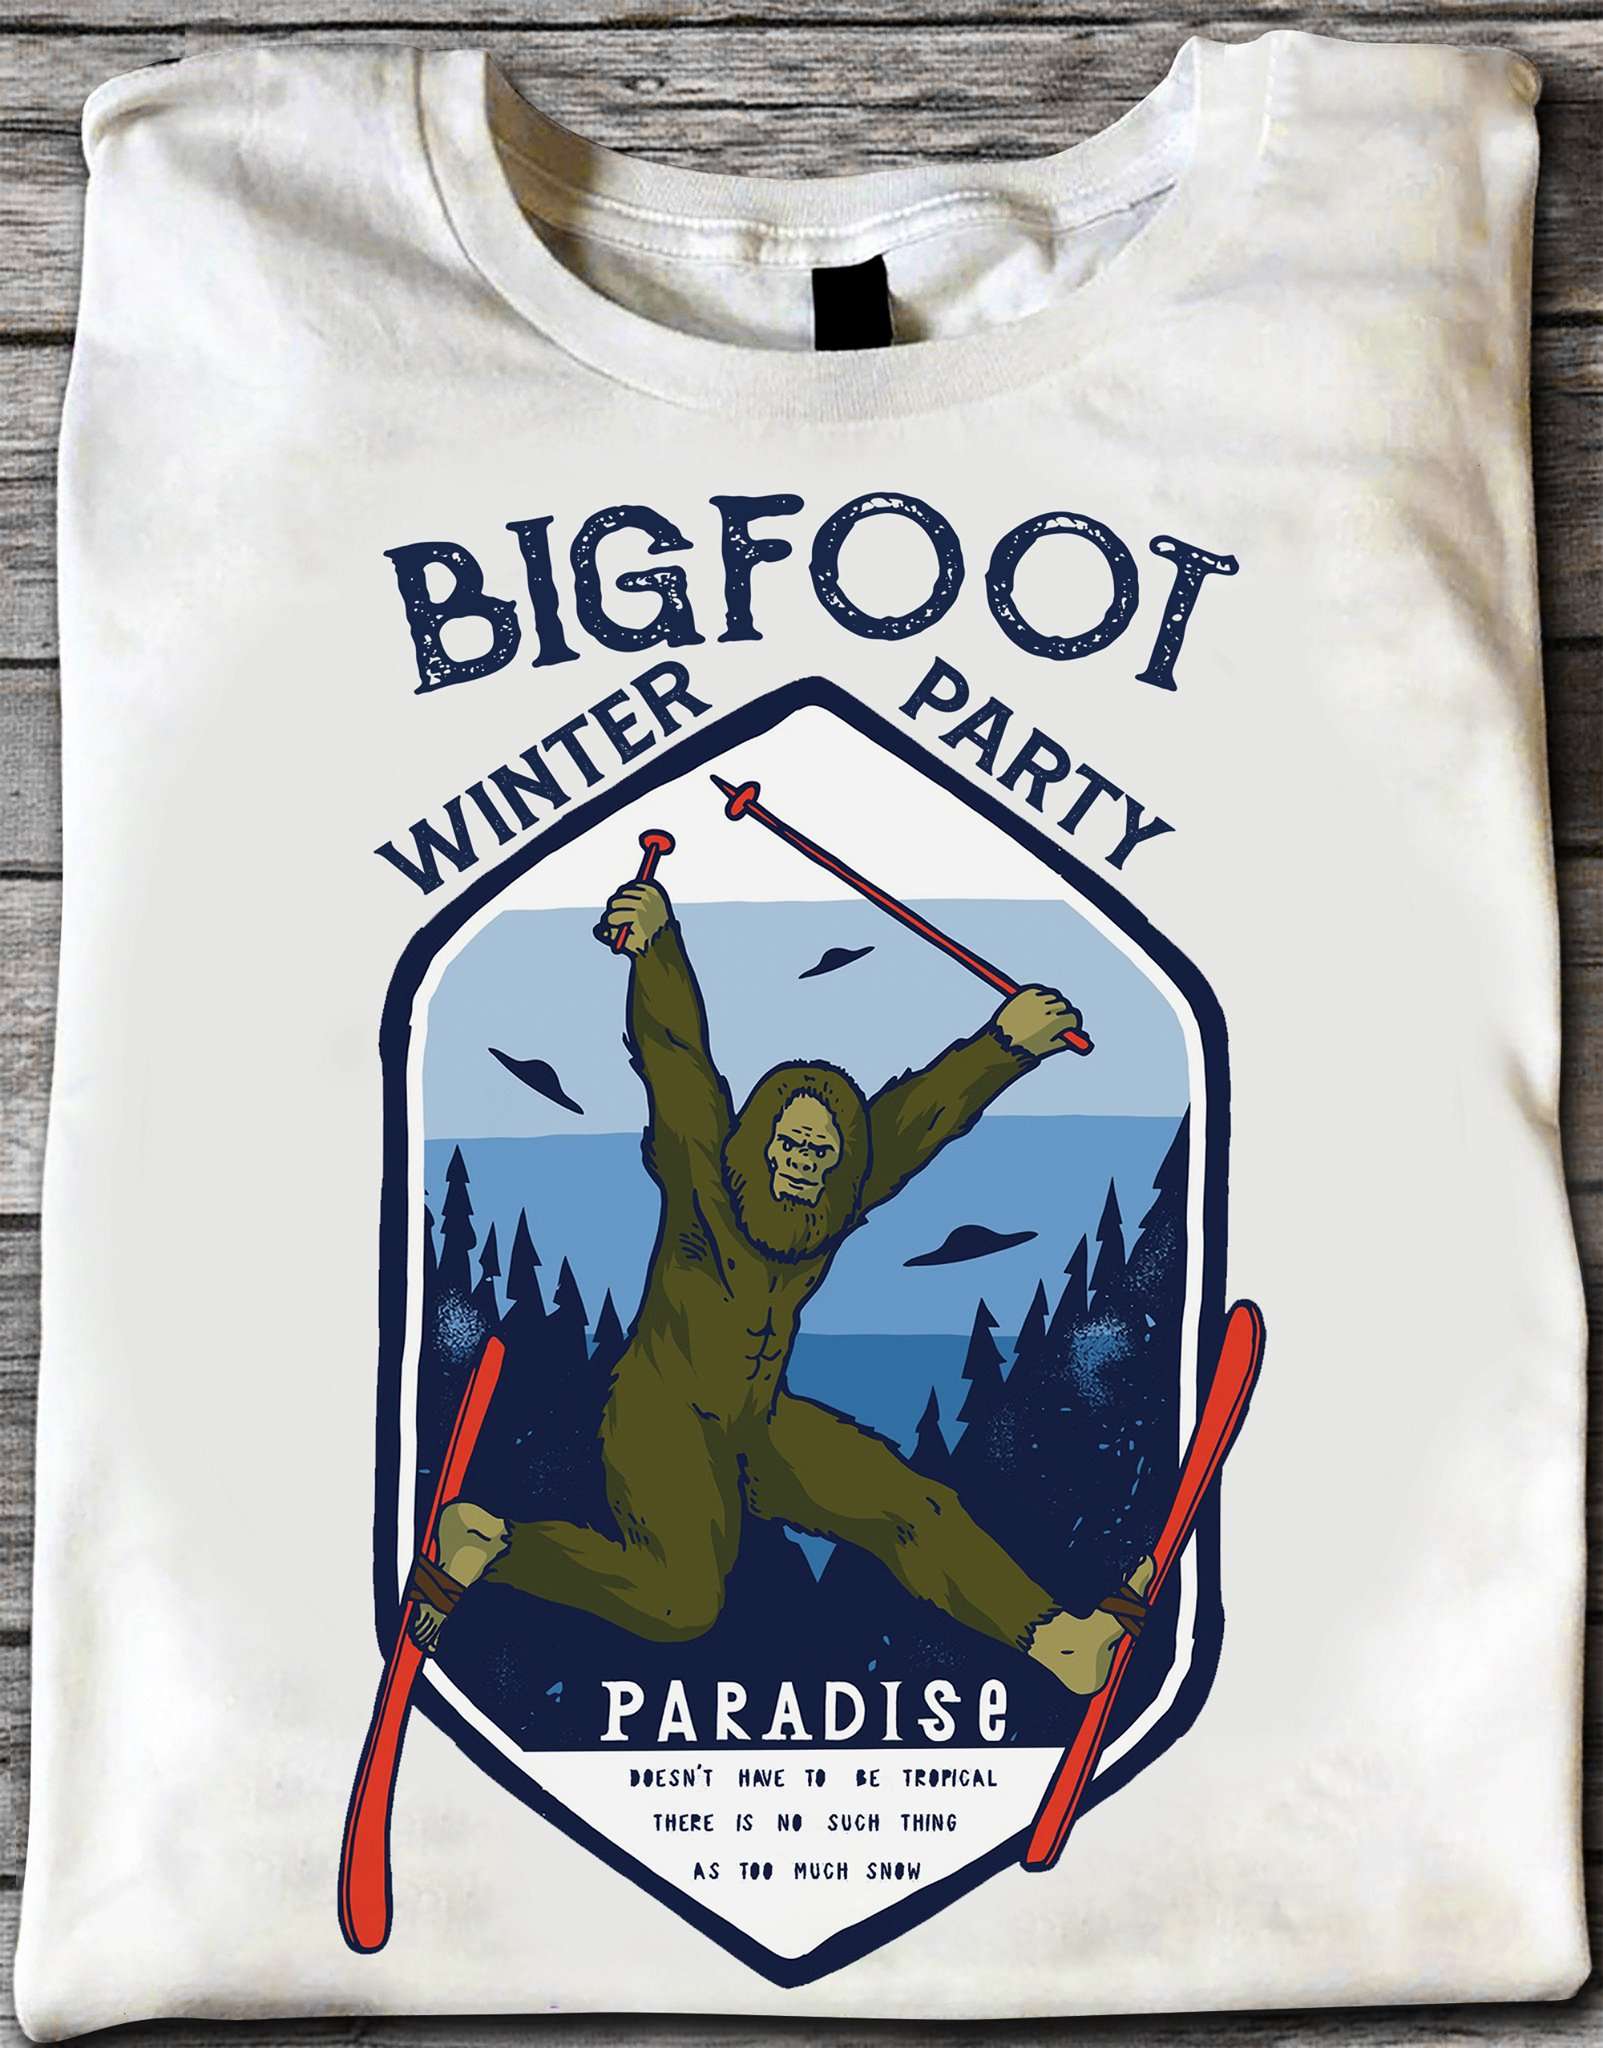 Bigfoot winter party - Bigfoot and UFO, Gift for skiing person